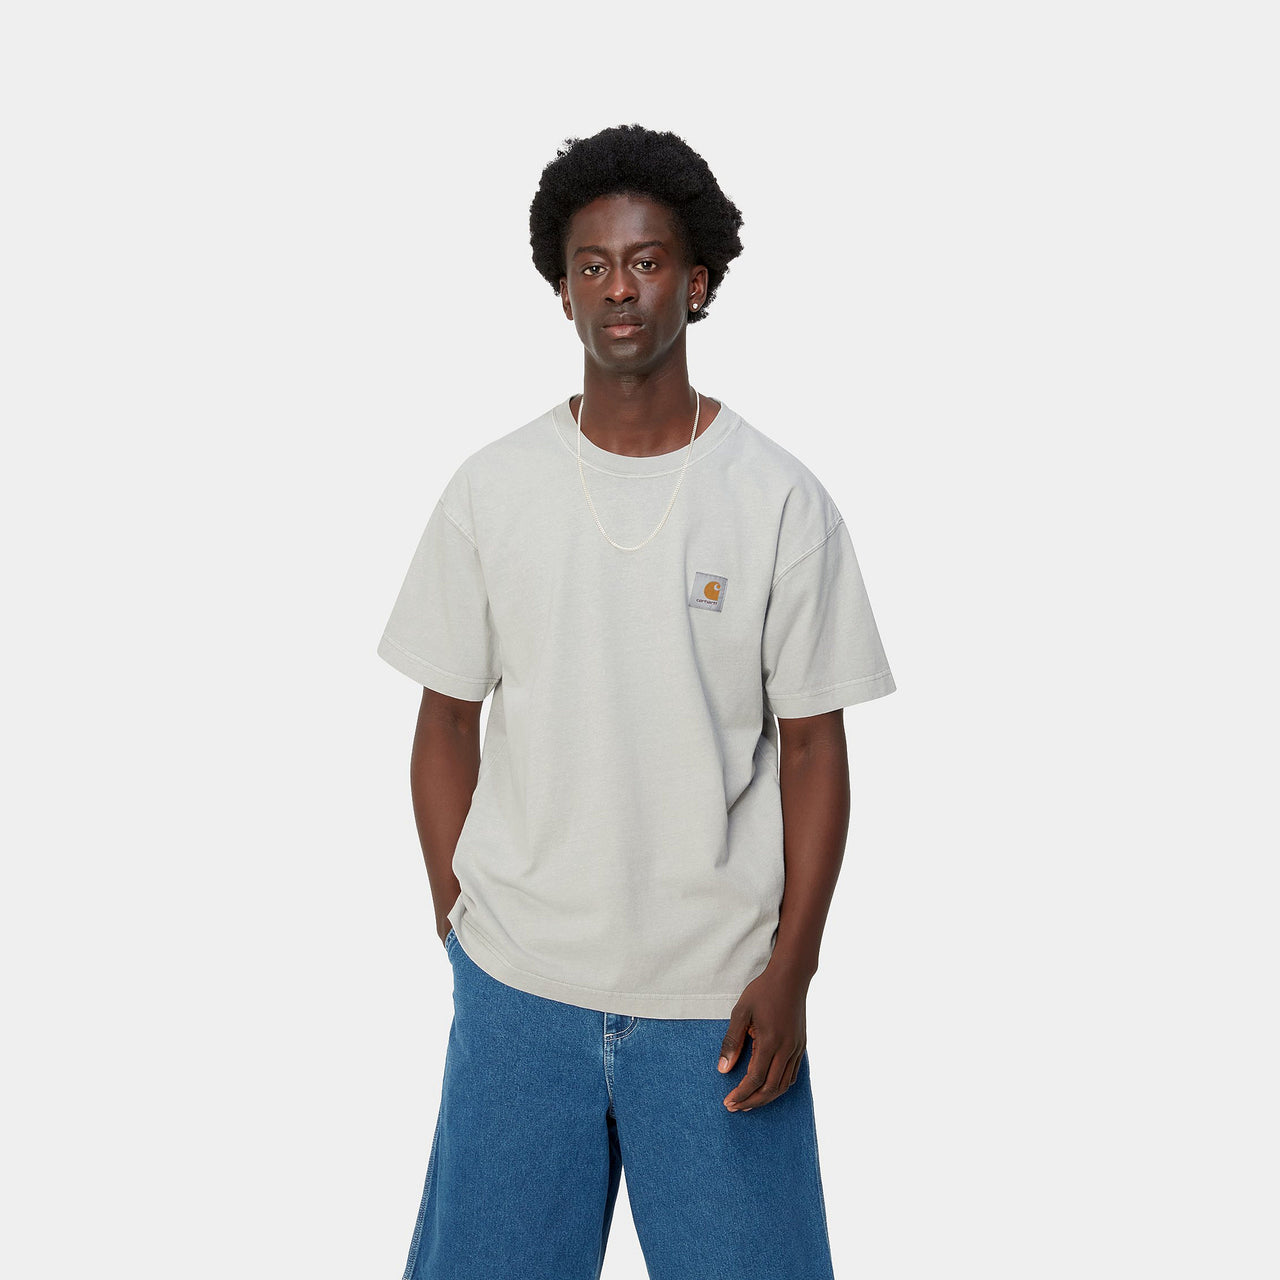 S/S NELSON T-SHIRT BY CARHARTT WIP